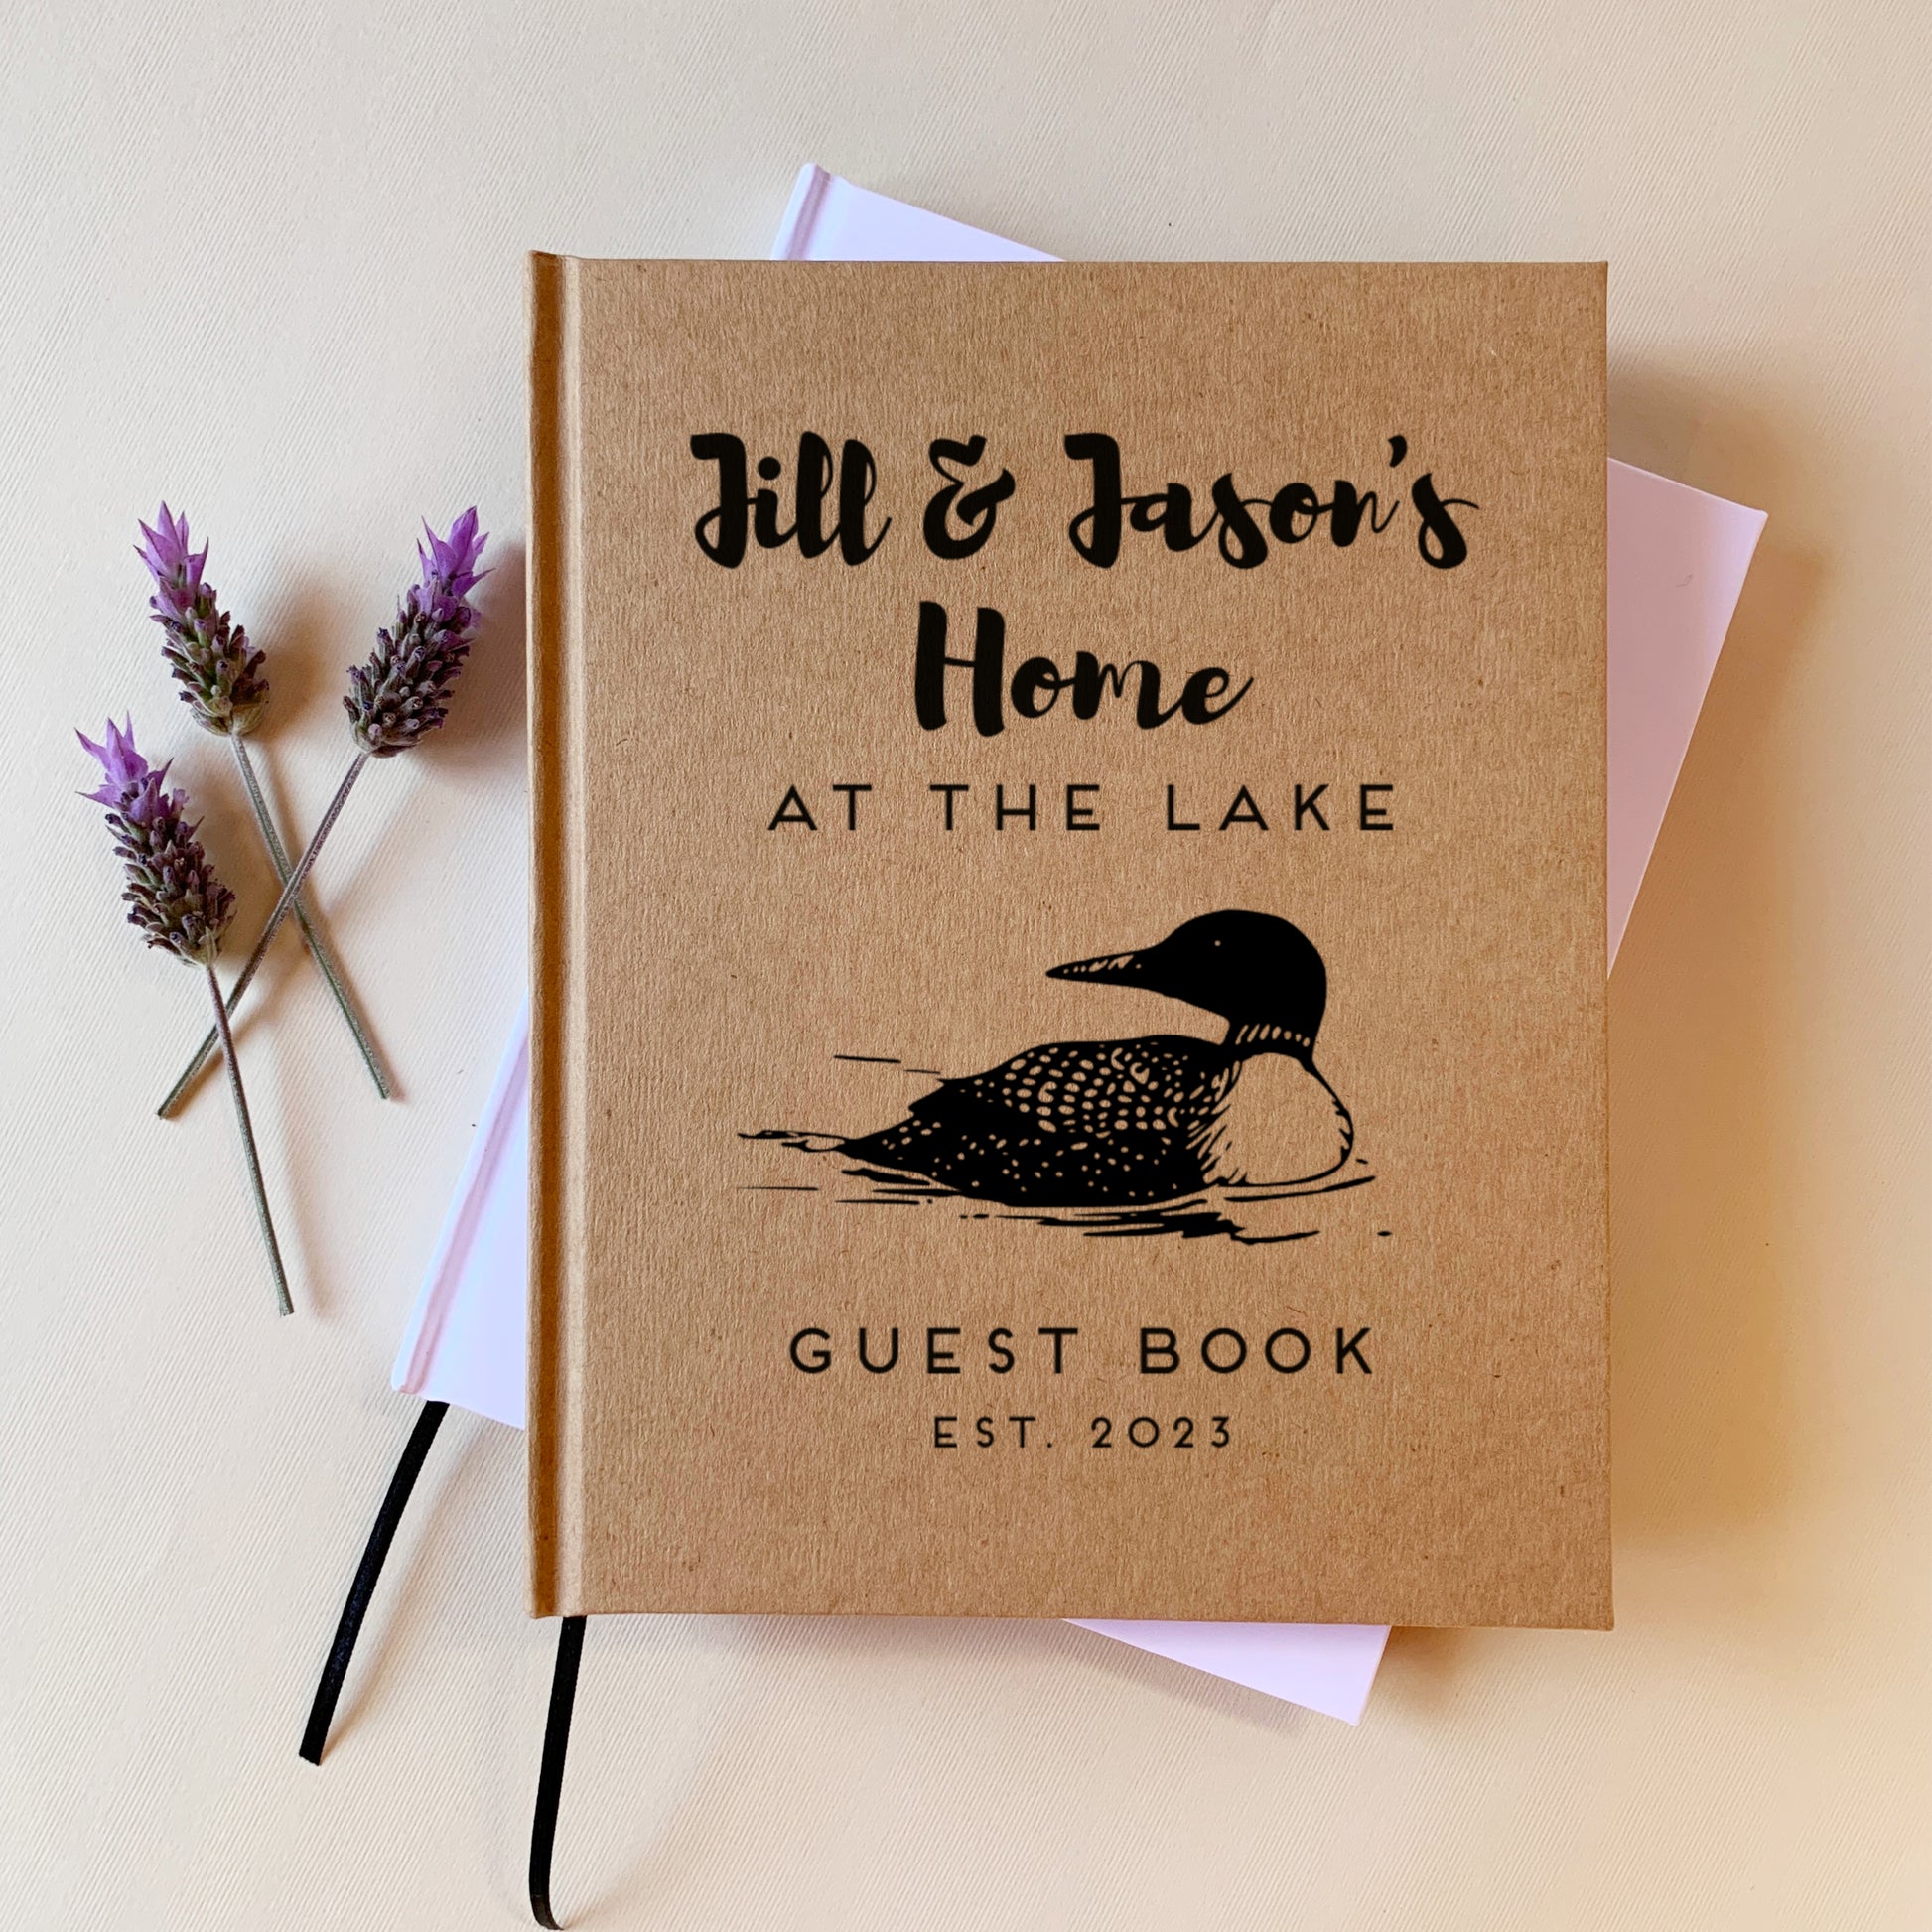 Guest Book For Vacation Home Airbnb Vrbo Holiday Rental Guestbook